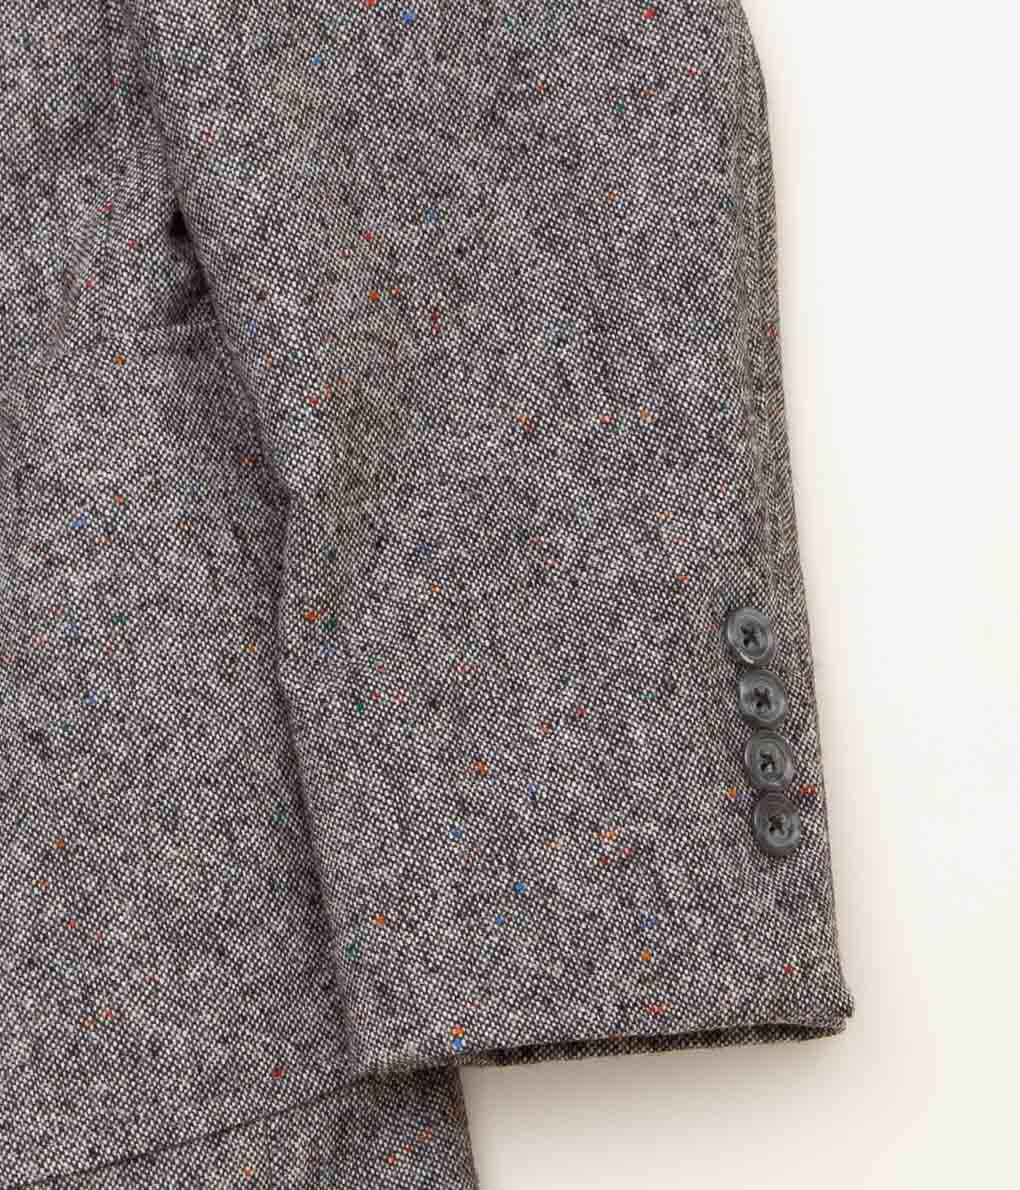 INDIVIDUALIZED CLOTHING "DONEGAL TWEED SPORTCOAT"(GRAY)